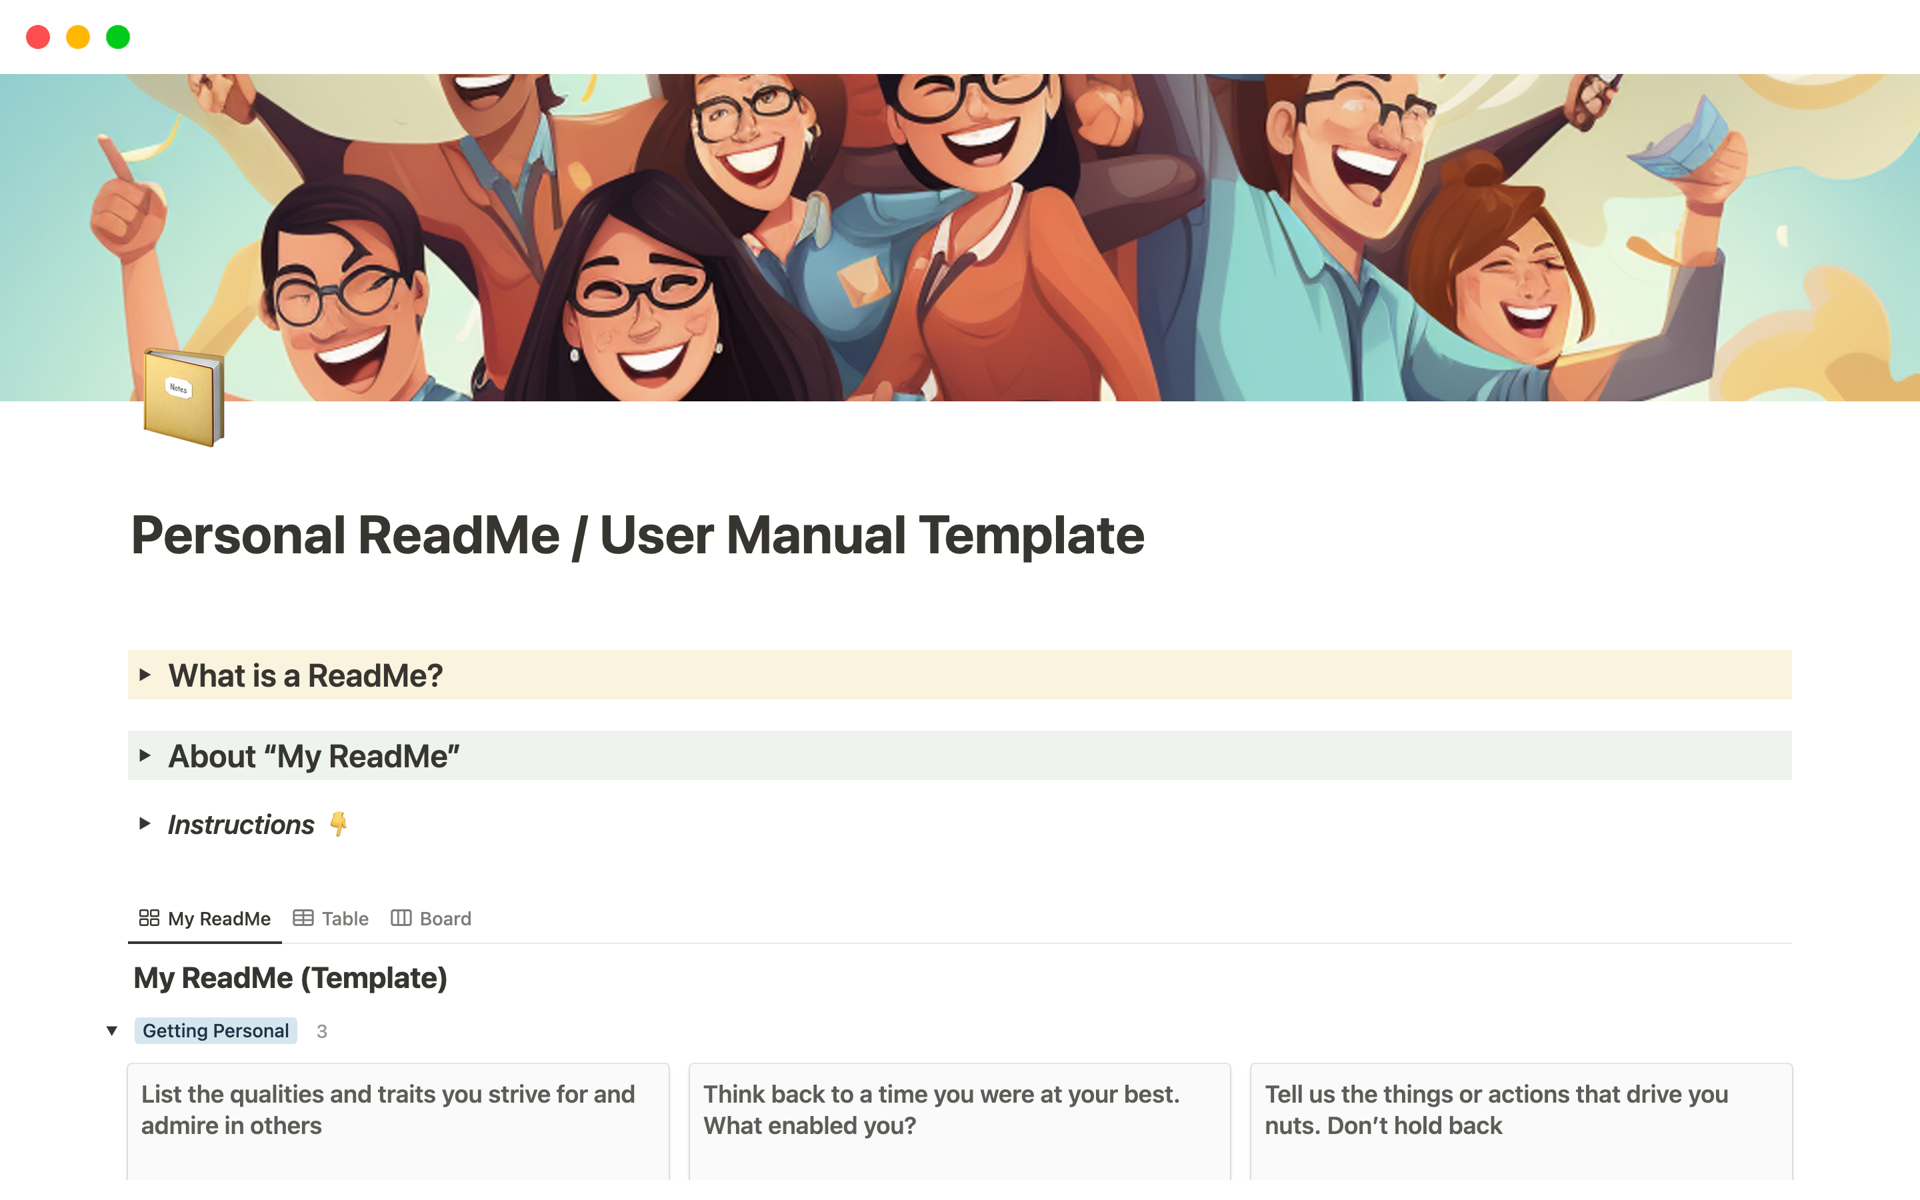 A template preview for Personal ReadMe / User Manual